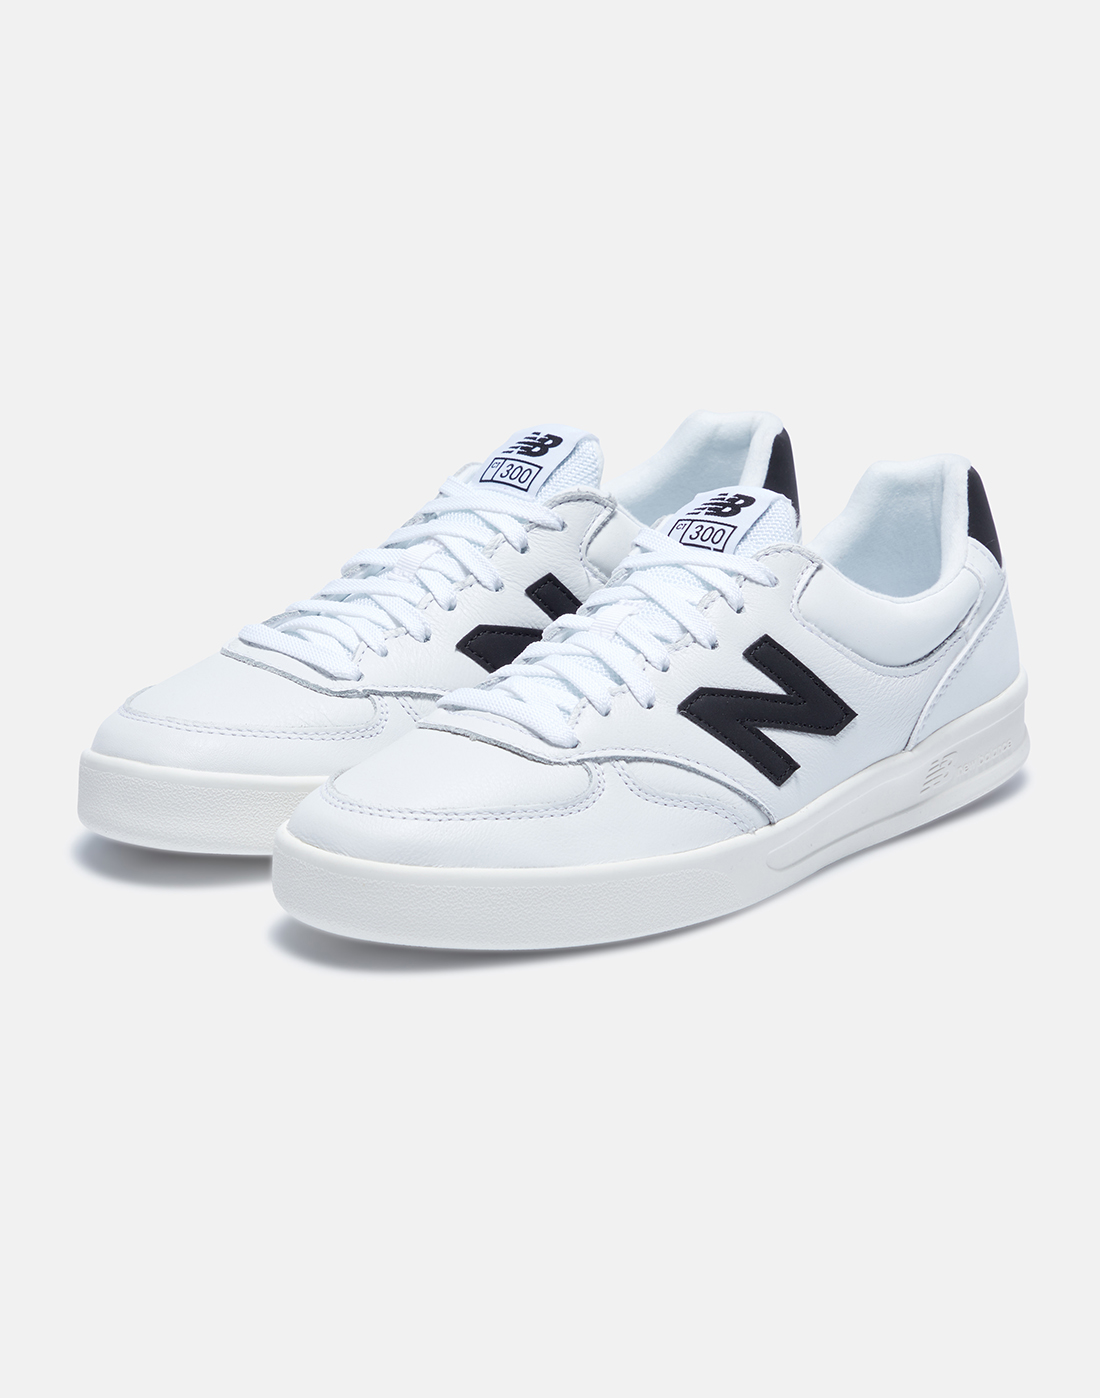 New Balance Mens CT300 Trainers - White | Life Style Sports IE